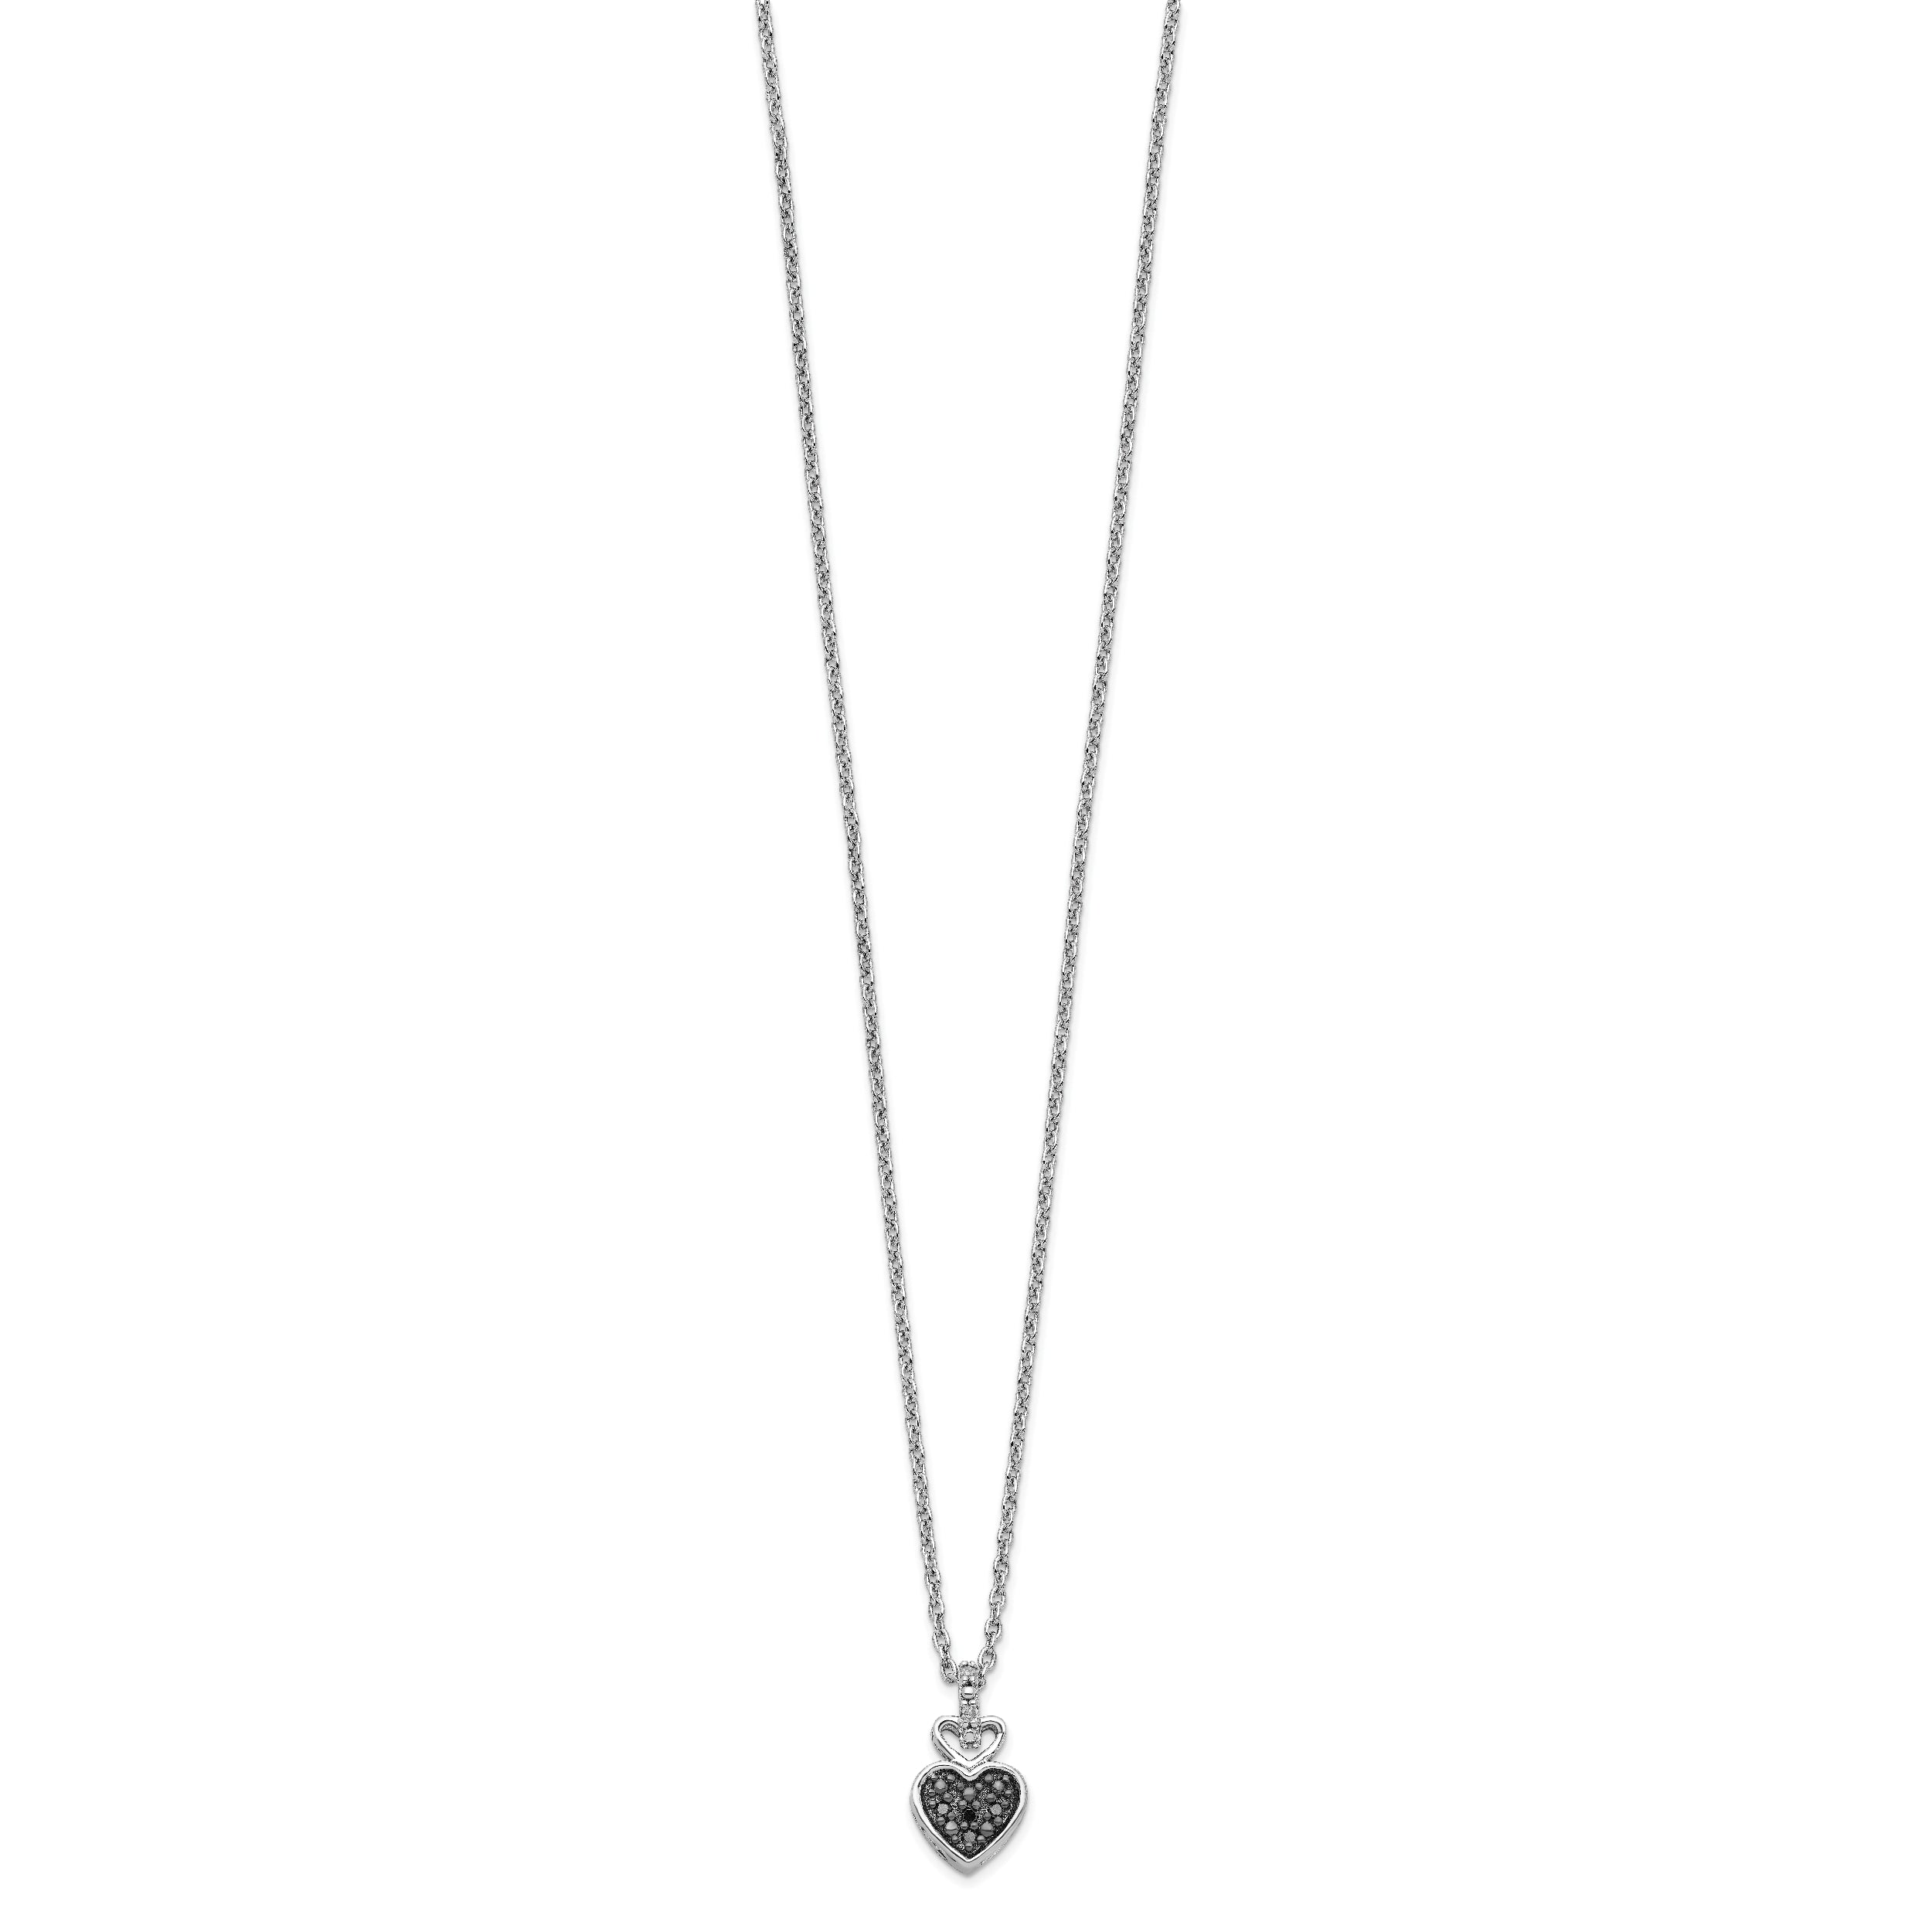 White Night Sterling Silver Rhodium-plated White and Black Diamond Heart 18 Inch Necklace with 2 Inch Extender